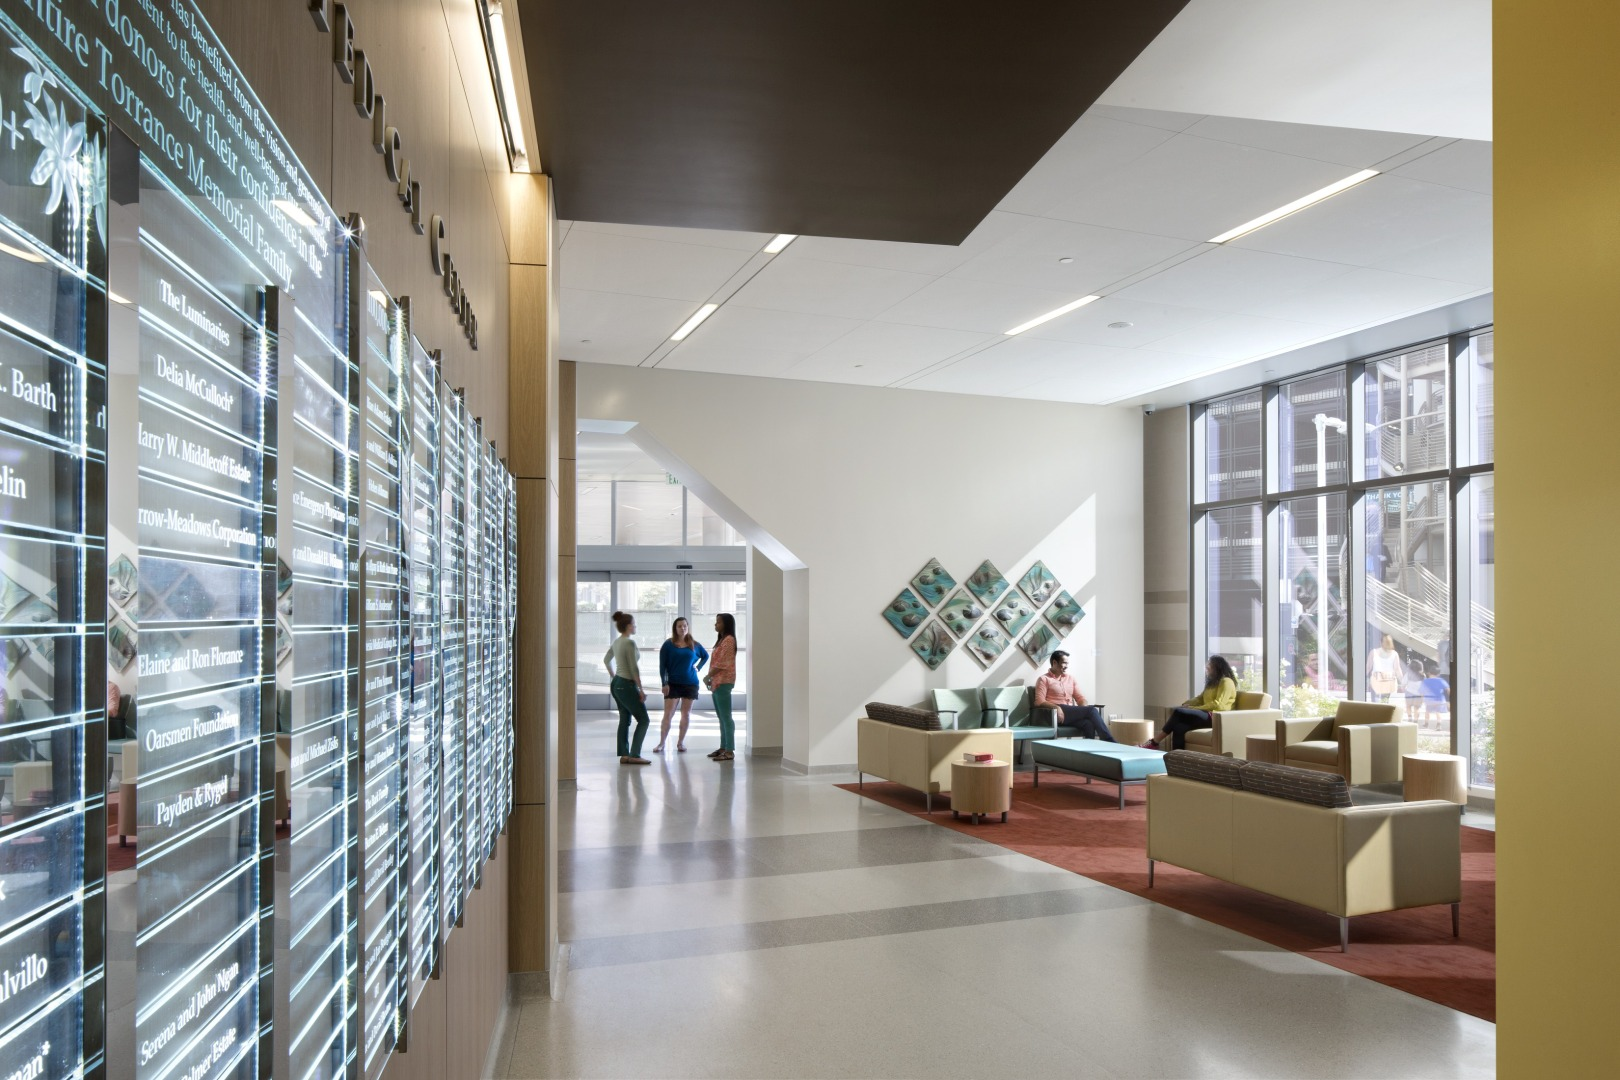 There are many strategies for behavioral health facility design.